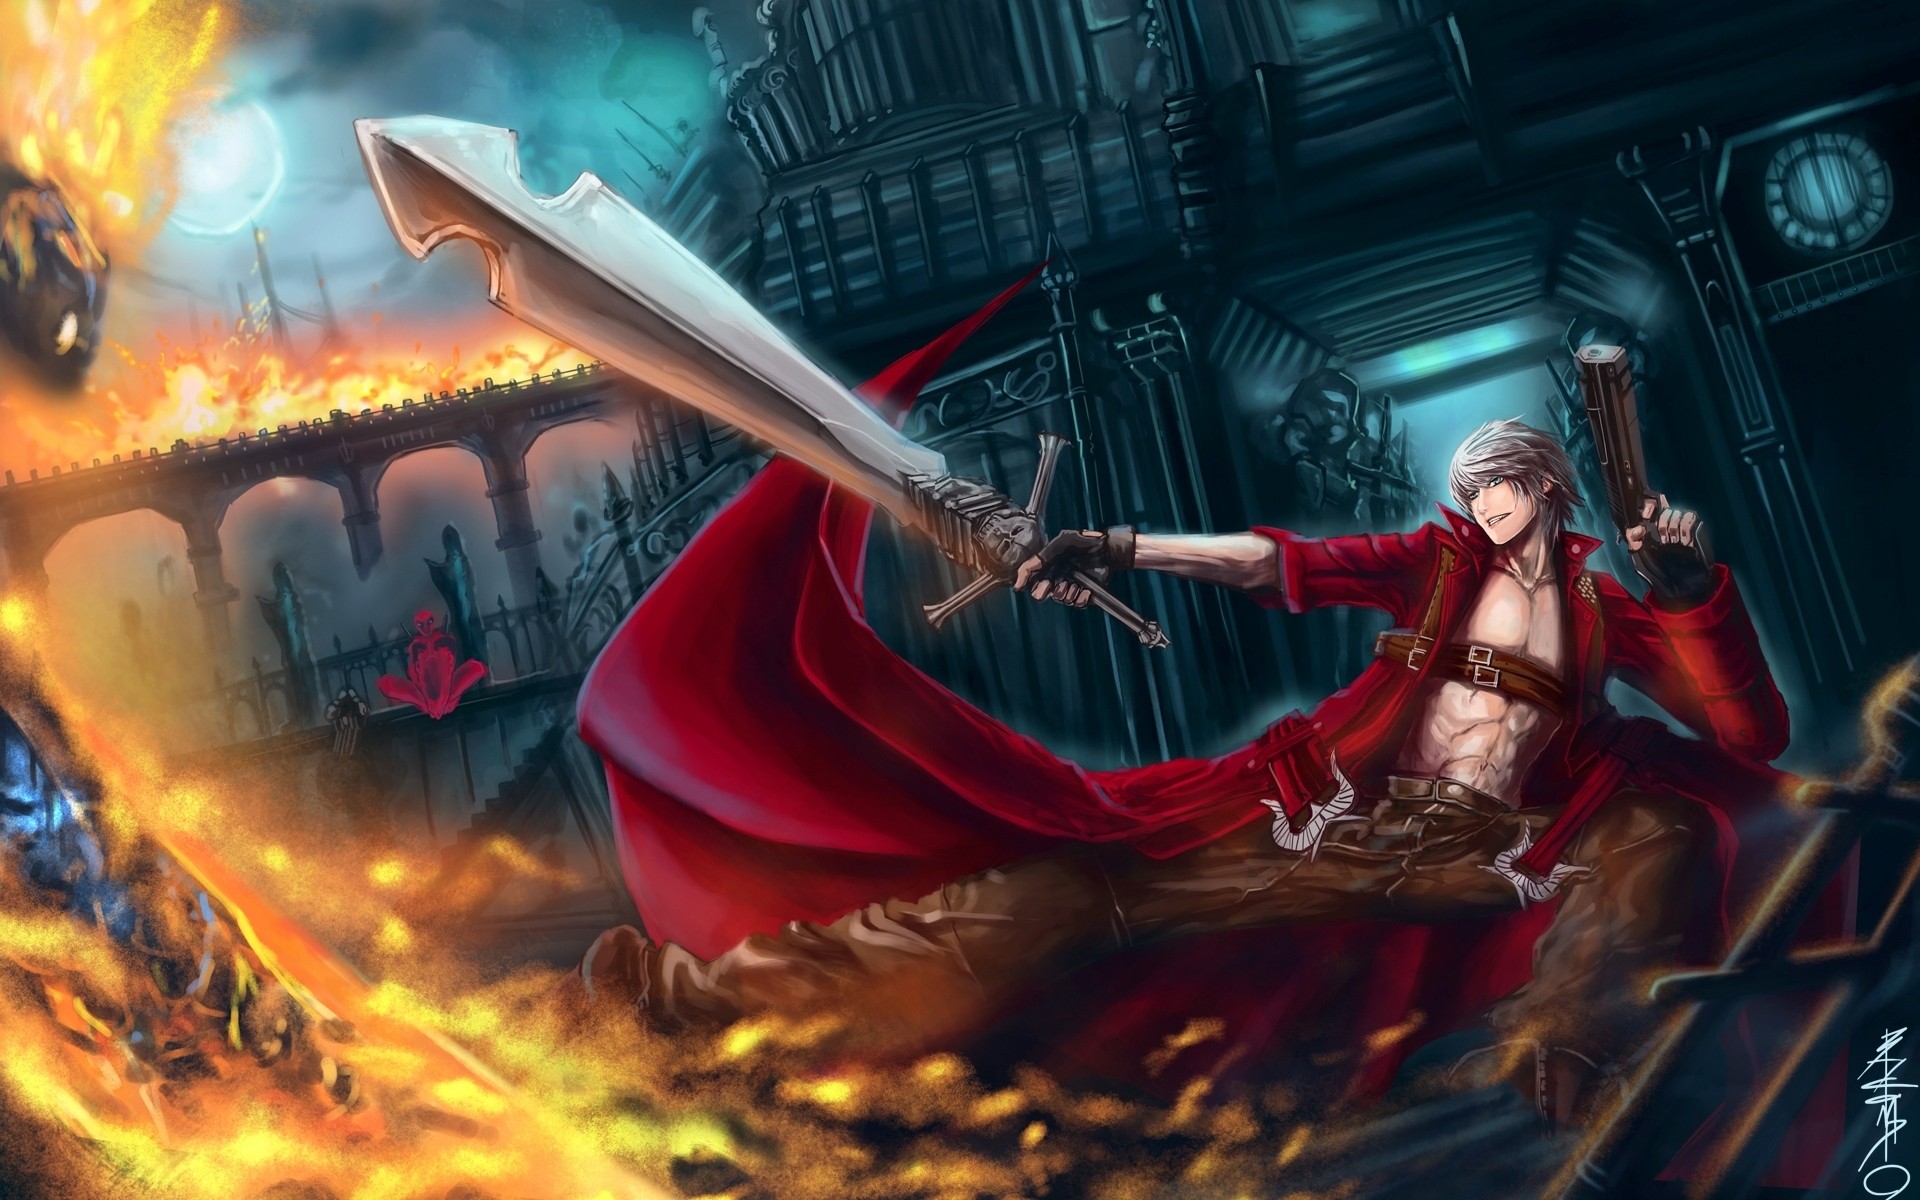 Devil May Cry 3 Wallpaper 70 Pictures